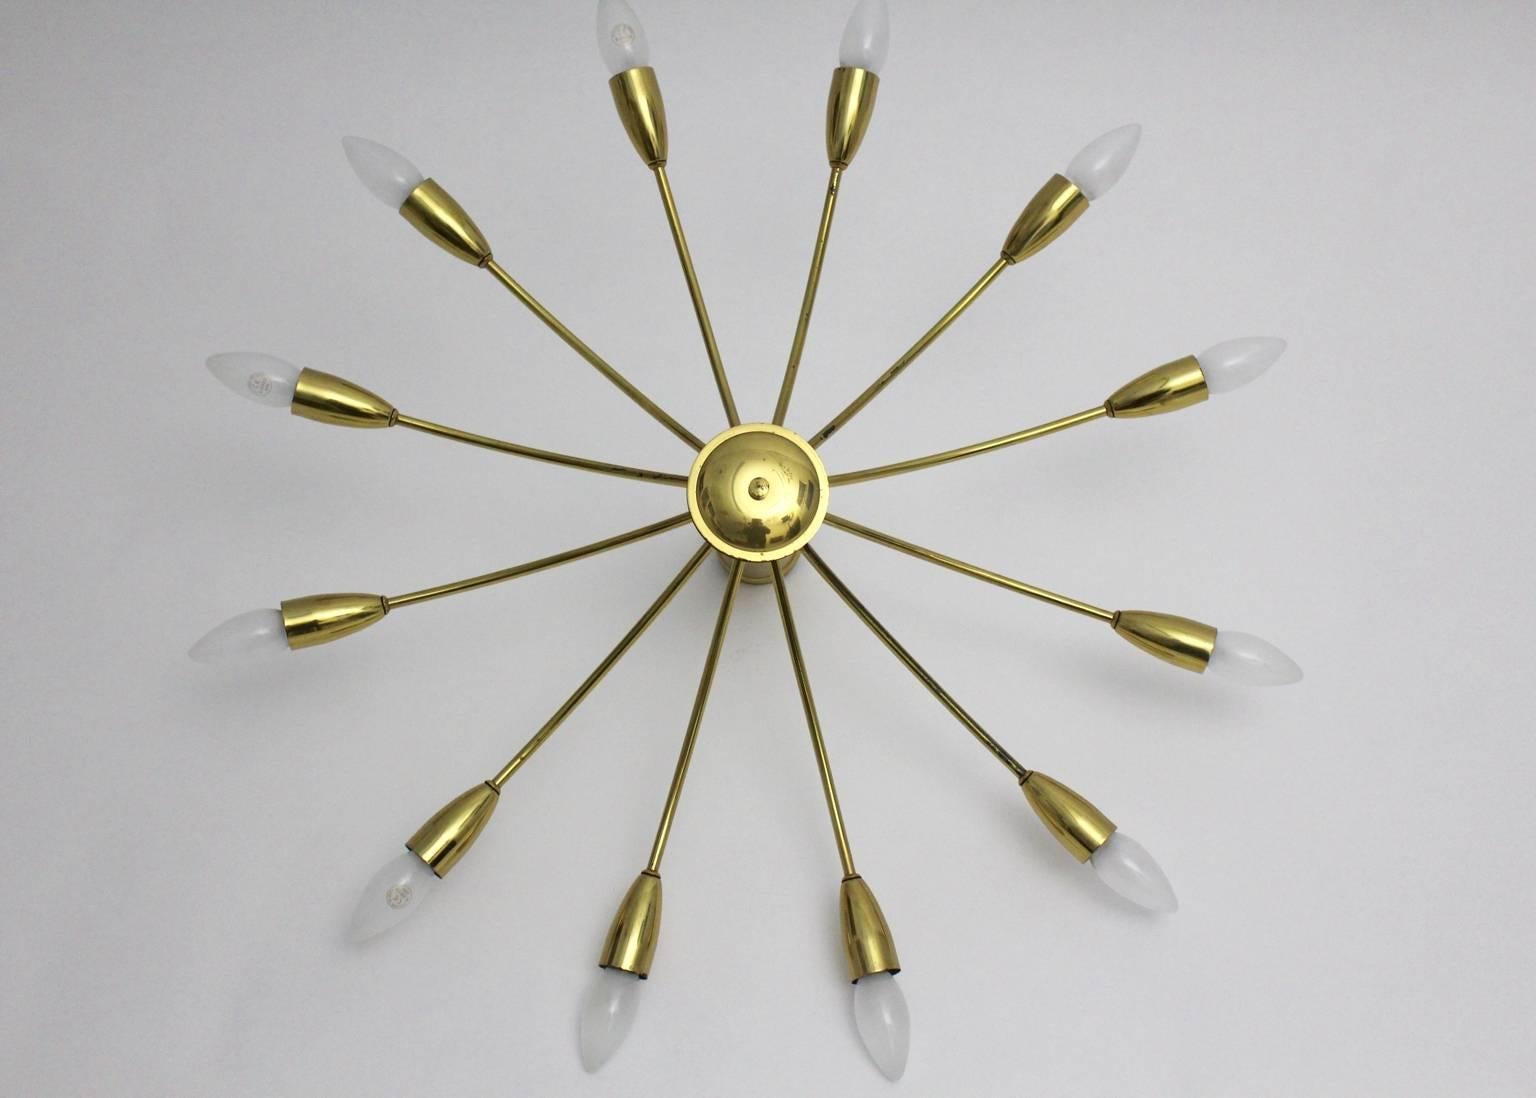 This presented flush mount was made of curved polished brass and features 12-arms with 12 sockets E 14.
Also the shape is elegant and looks like sunbursts.
The  lighting was designed and executed by Kalmar, Austria 1950s.

The flush mount is in very